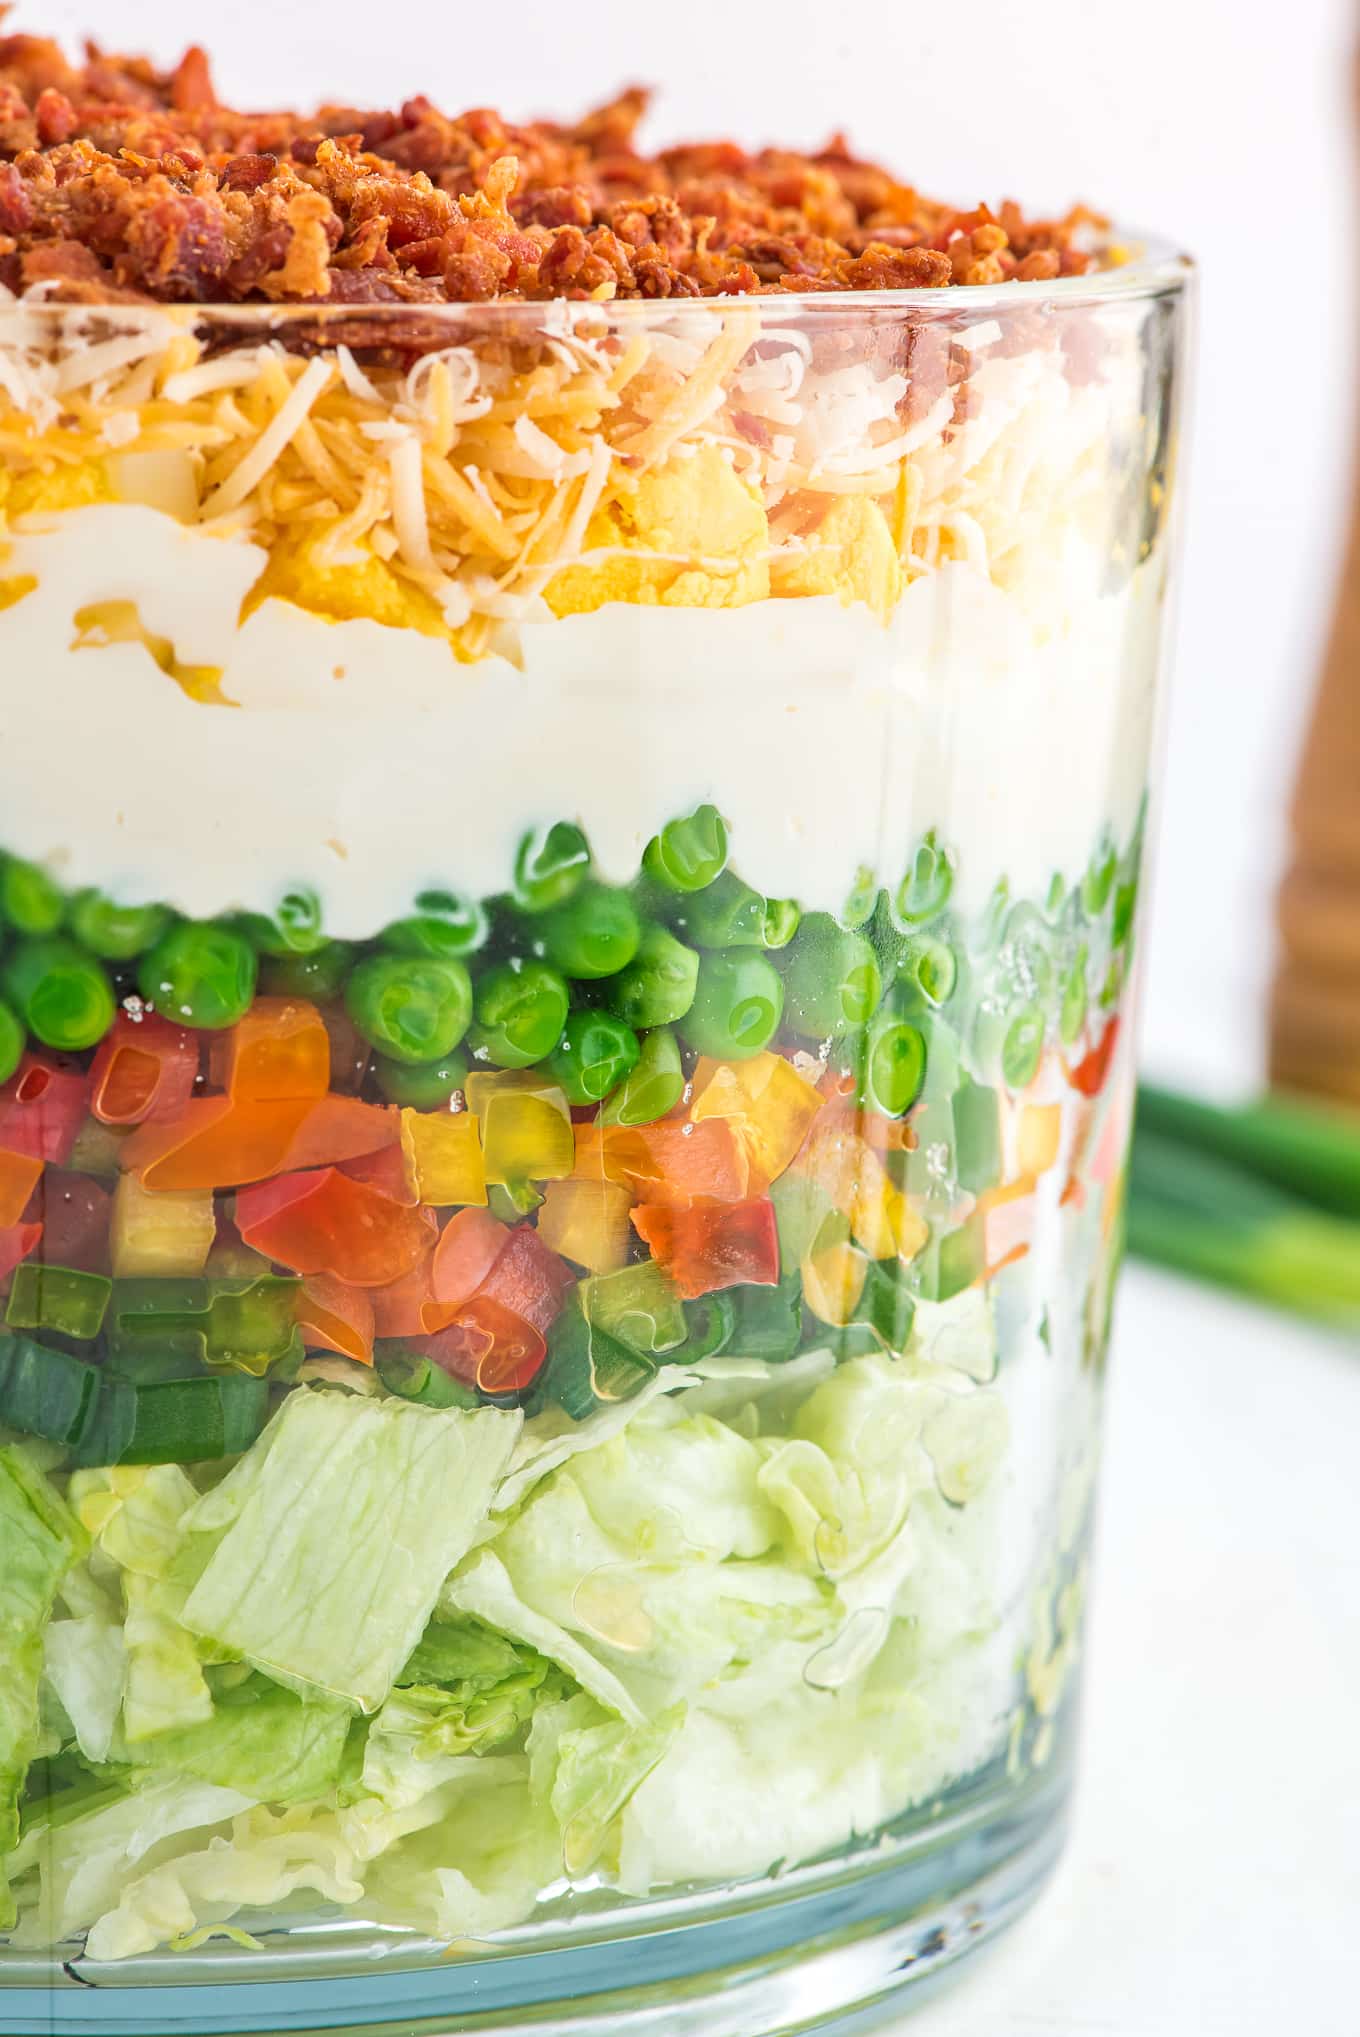 A colorful layered salad in a glass dish on the table.